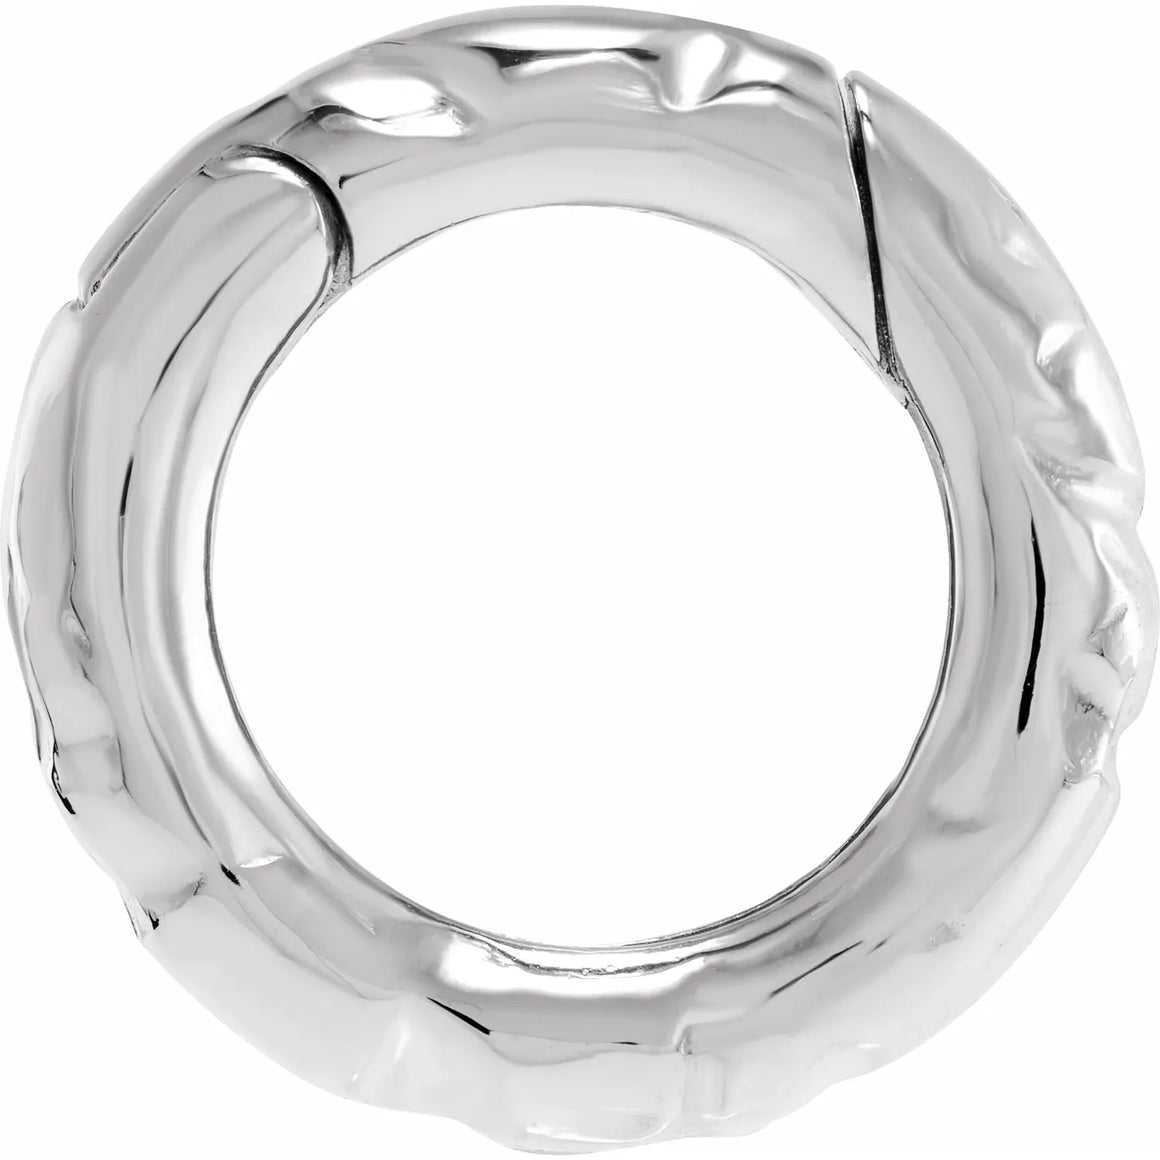 Hinged Round Hammered Charm Bail In 14K White Gold